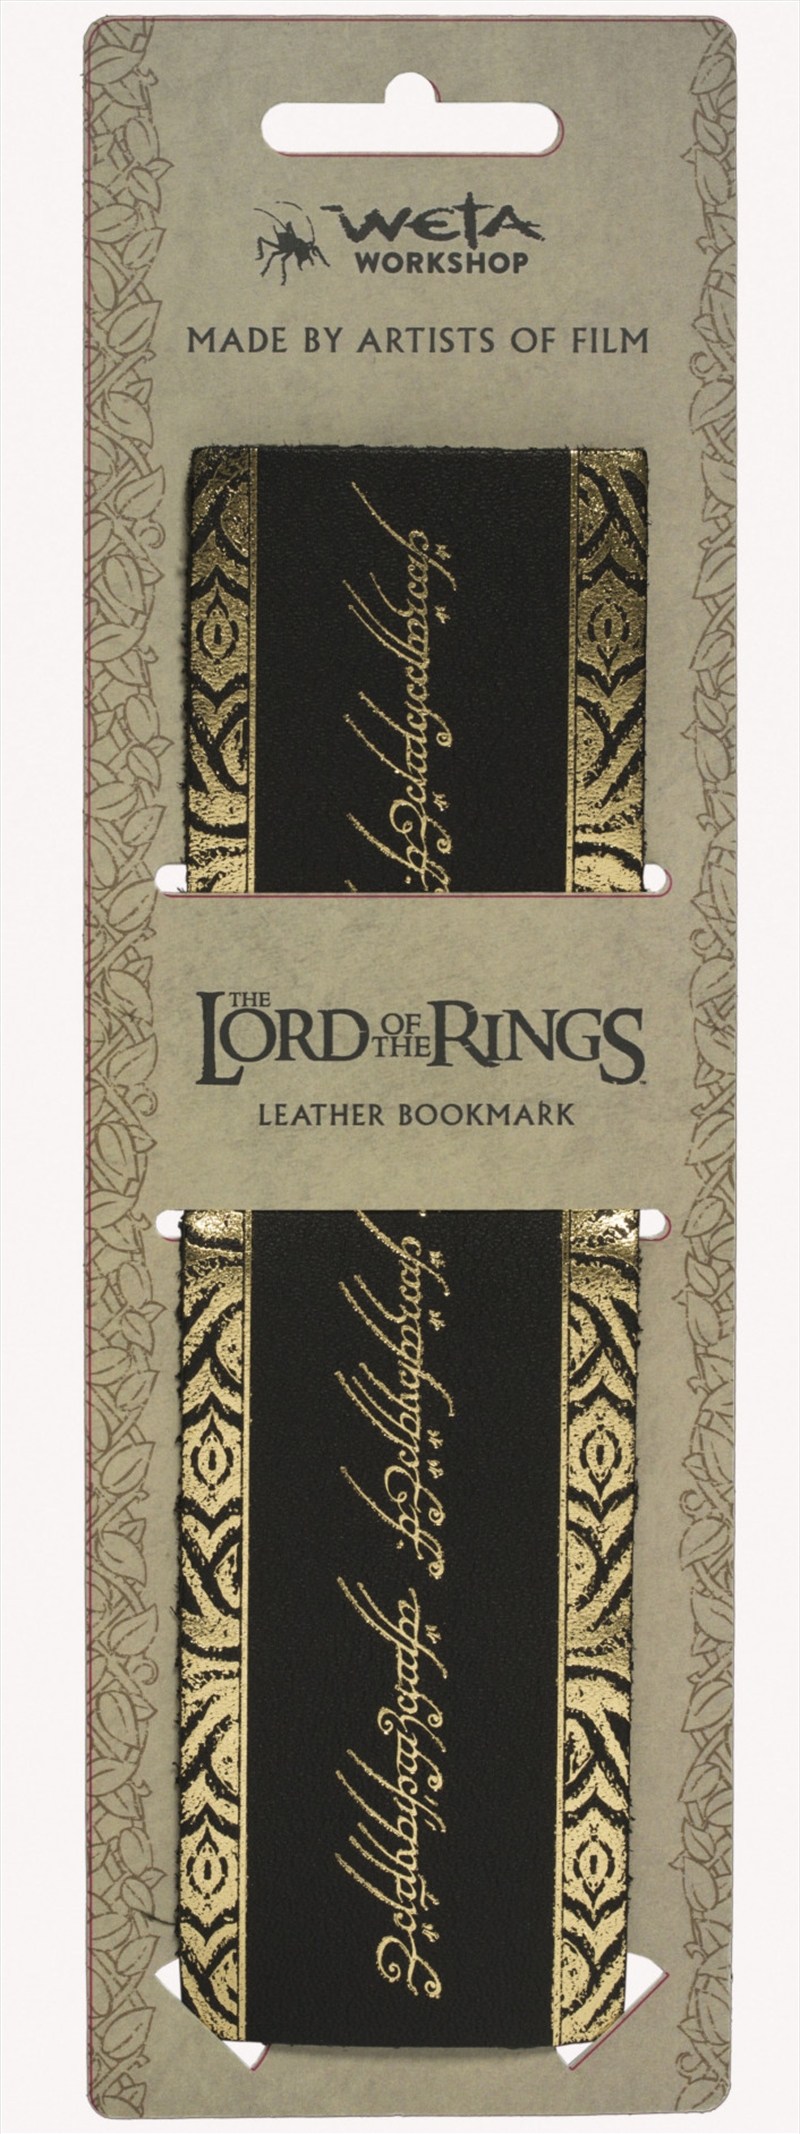 The Lord of the Rings Leather Bookmark The One Ring Inscription/Product Detail/Bookmarks & Reading Accessories